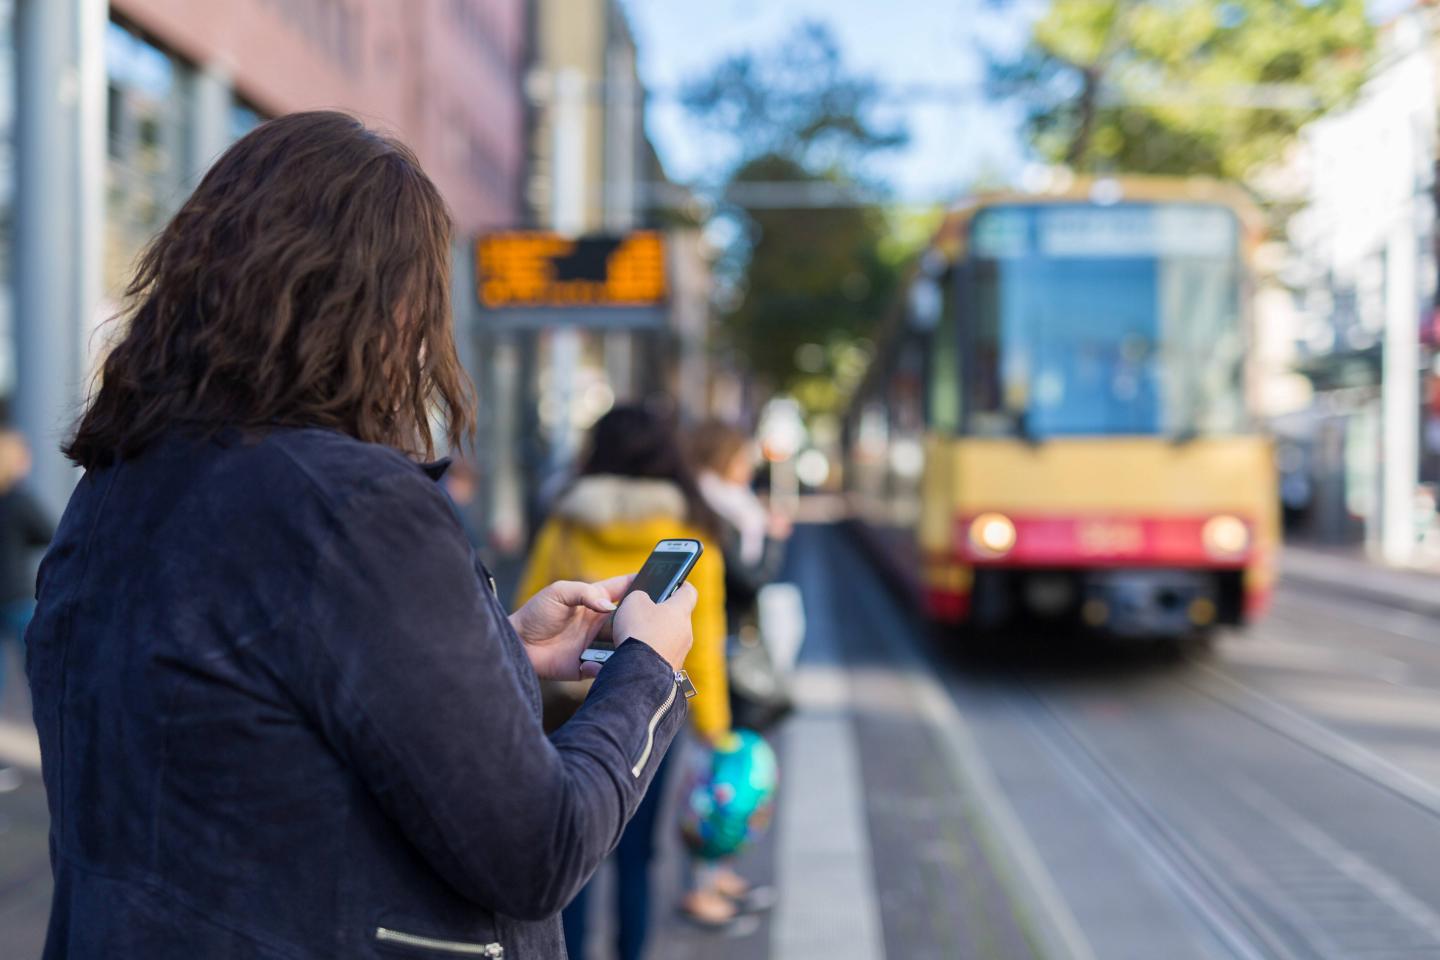 Paying Public Passenger Transport Tickets with a Smartphone Becomes Increasingly Popular. But is it 